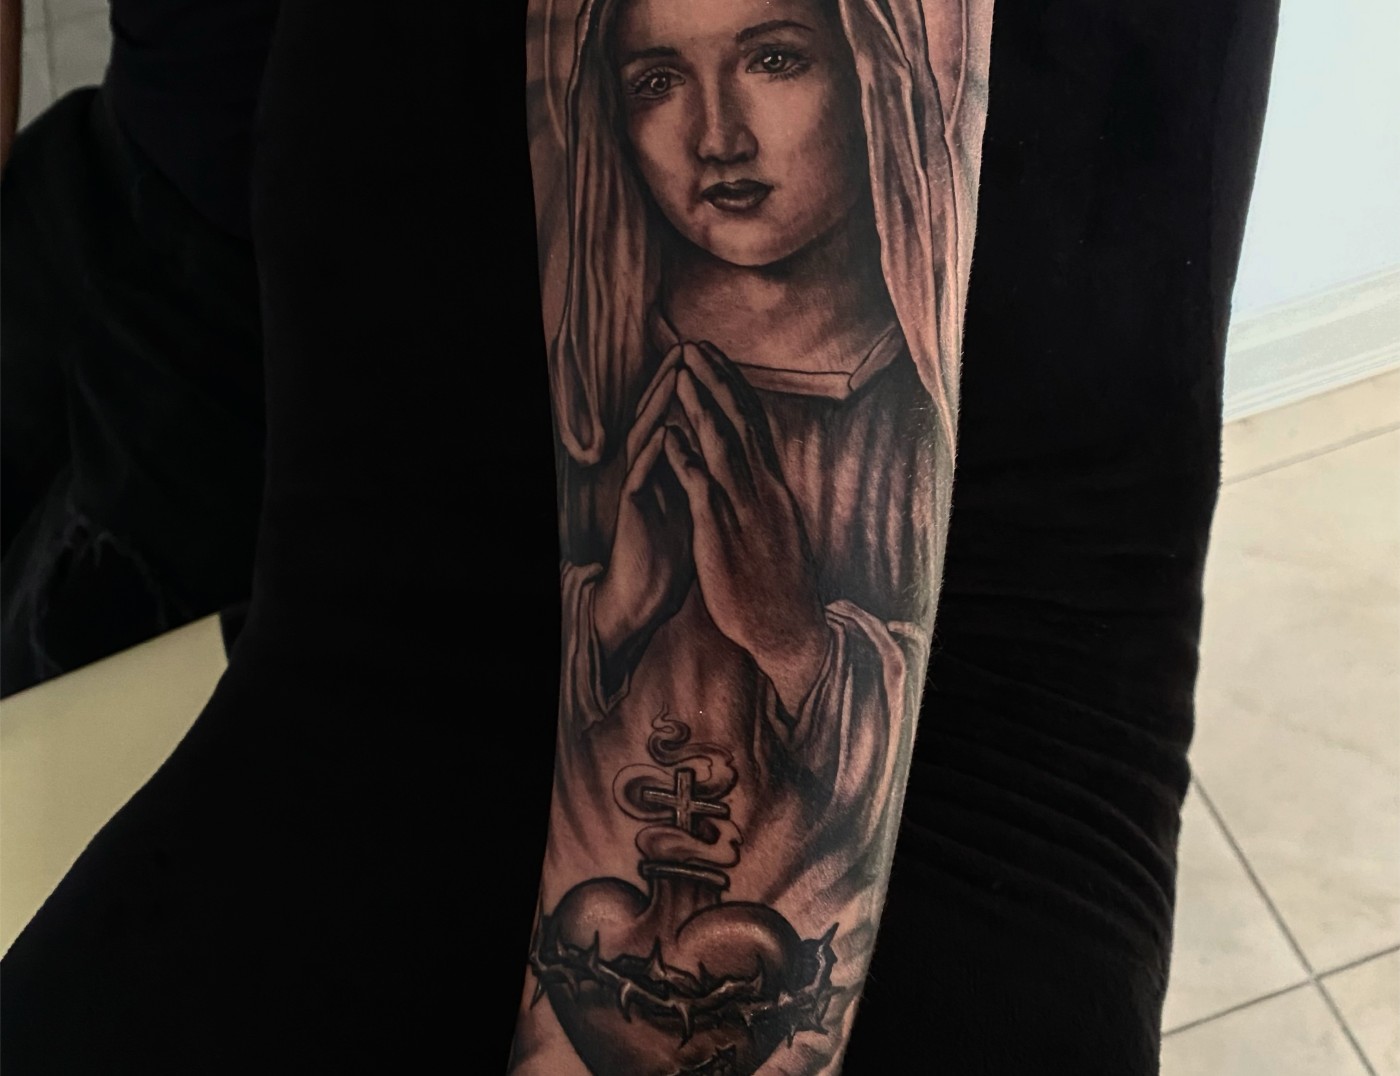 Madonna Blessing Hearts Black & Gray Photo Realism Portrait Tattoo By Rene Cristobal, A Guest Artist At Iron Palm Tattoos. The Madonna is a representation of Mary praying. The word "Madonna" comes from the Italian "ma donna," which means "my lady". Although usually depicted with baby Jesus it is also popular to see Mary praying or blessing something. Rene comes to us from Vision tattoo studio in Concepcion, Chile and is available for booking Sep 11th - Sept 18th 2023. We're open late night until 2AM. Call 404-973-7828 or stop by for a free consultation. Walk Ins are welcome.